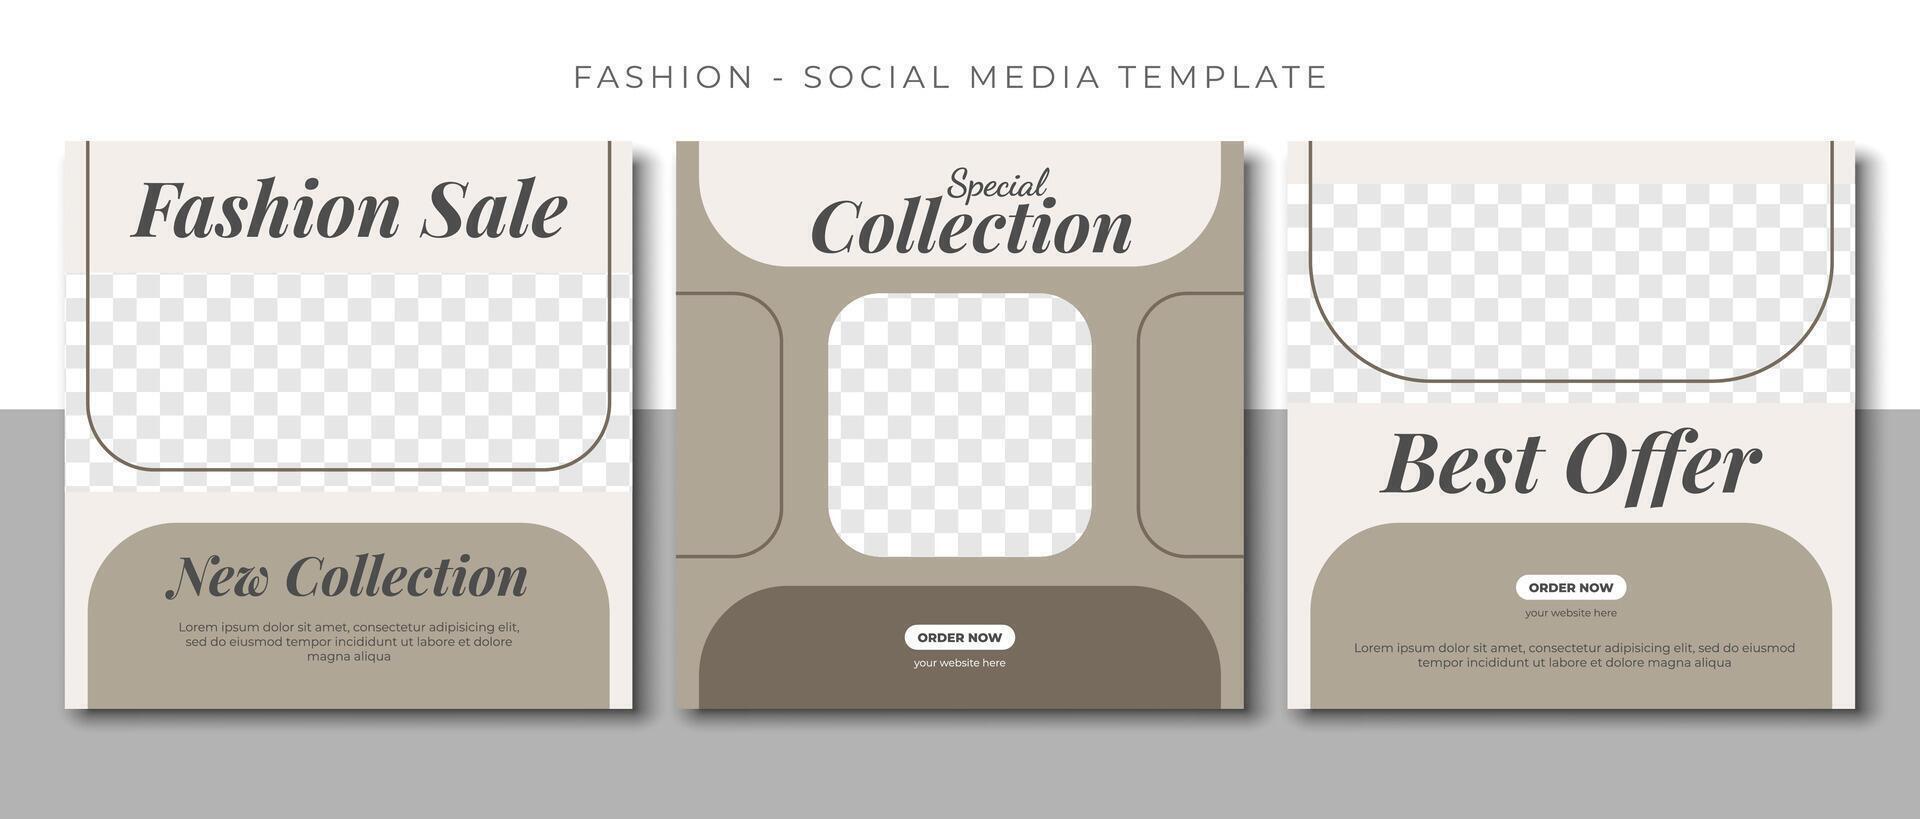 fashion woman beauty grey social media post template design, event promotion banner vector